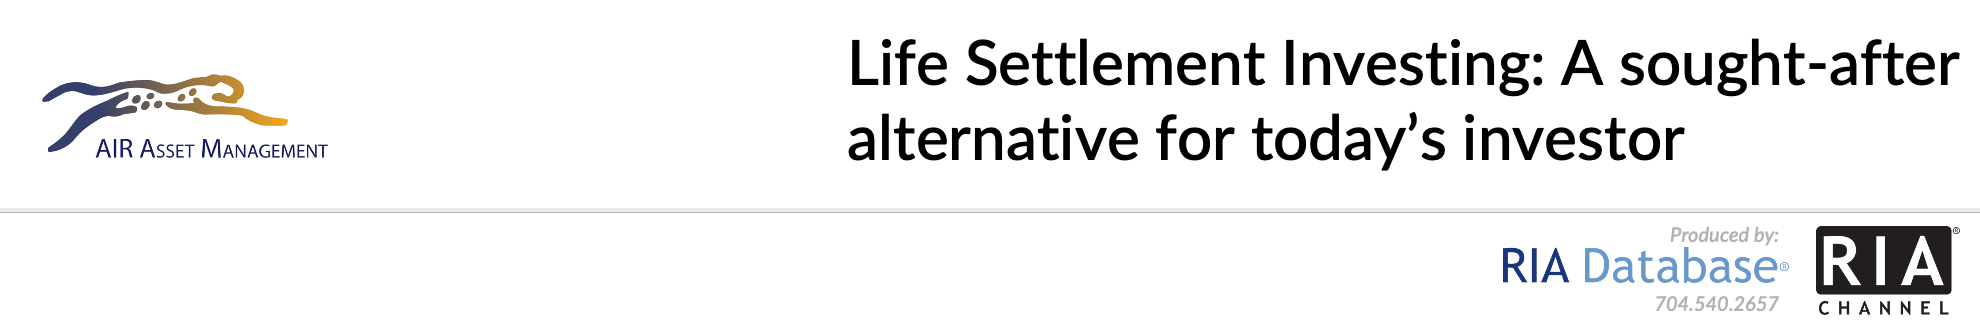 Life Settlement Investing: A sought-after alternative for today’s investor